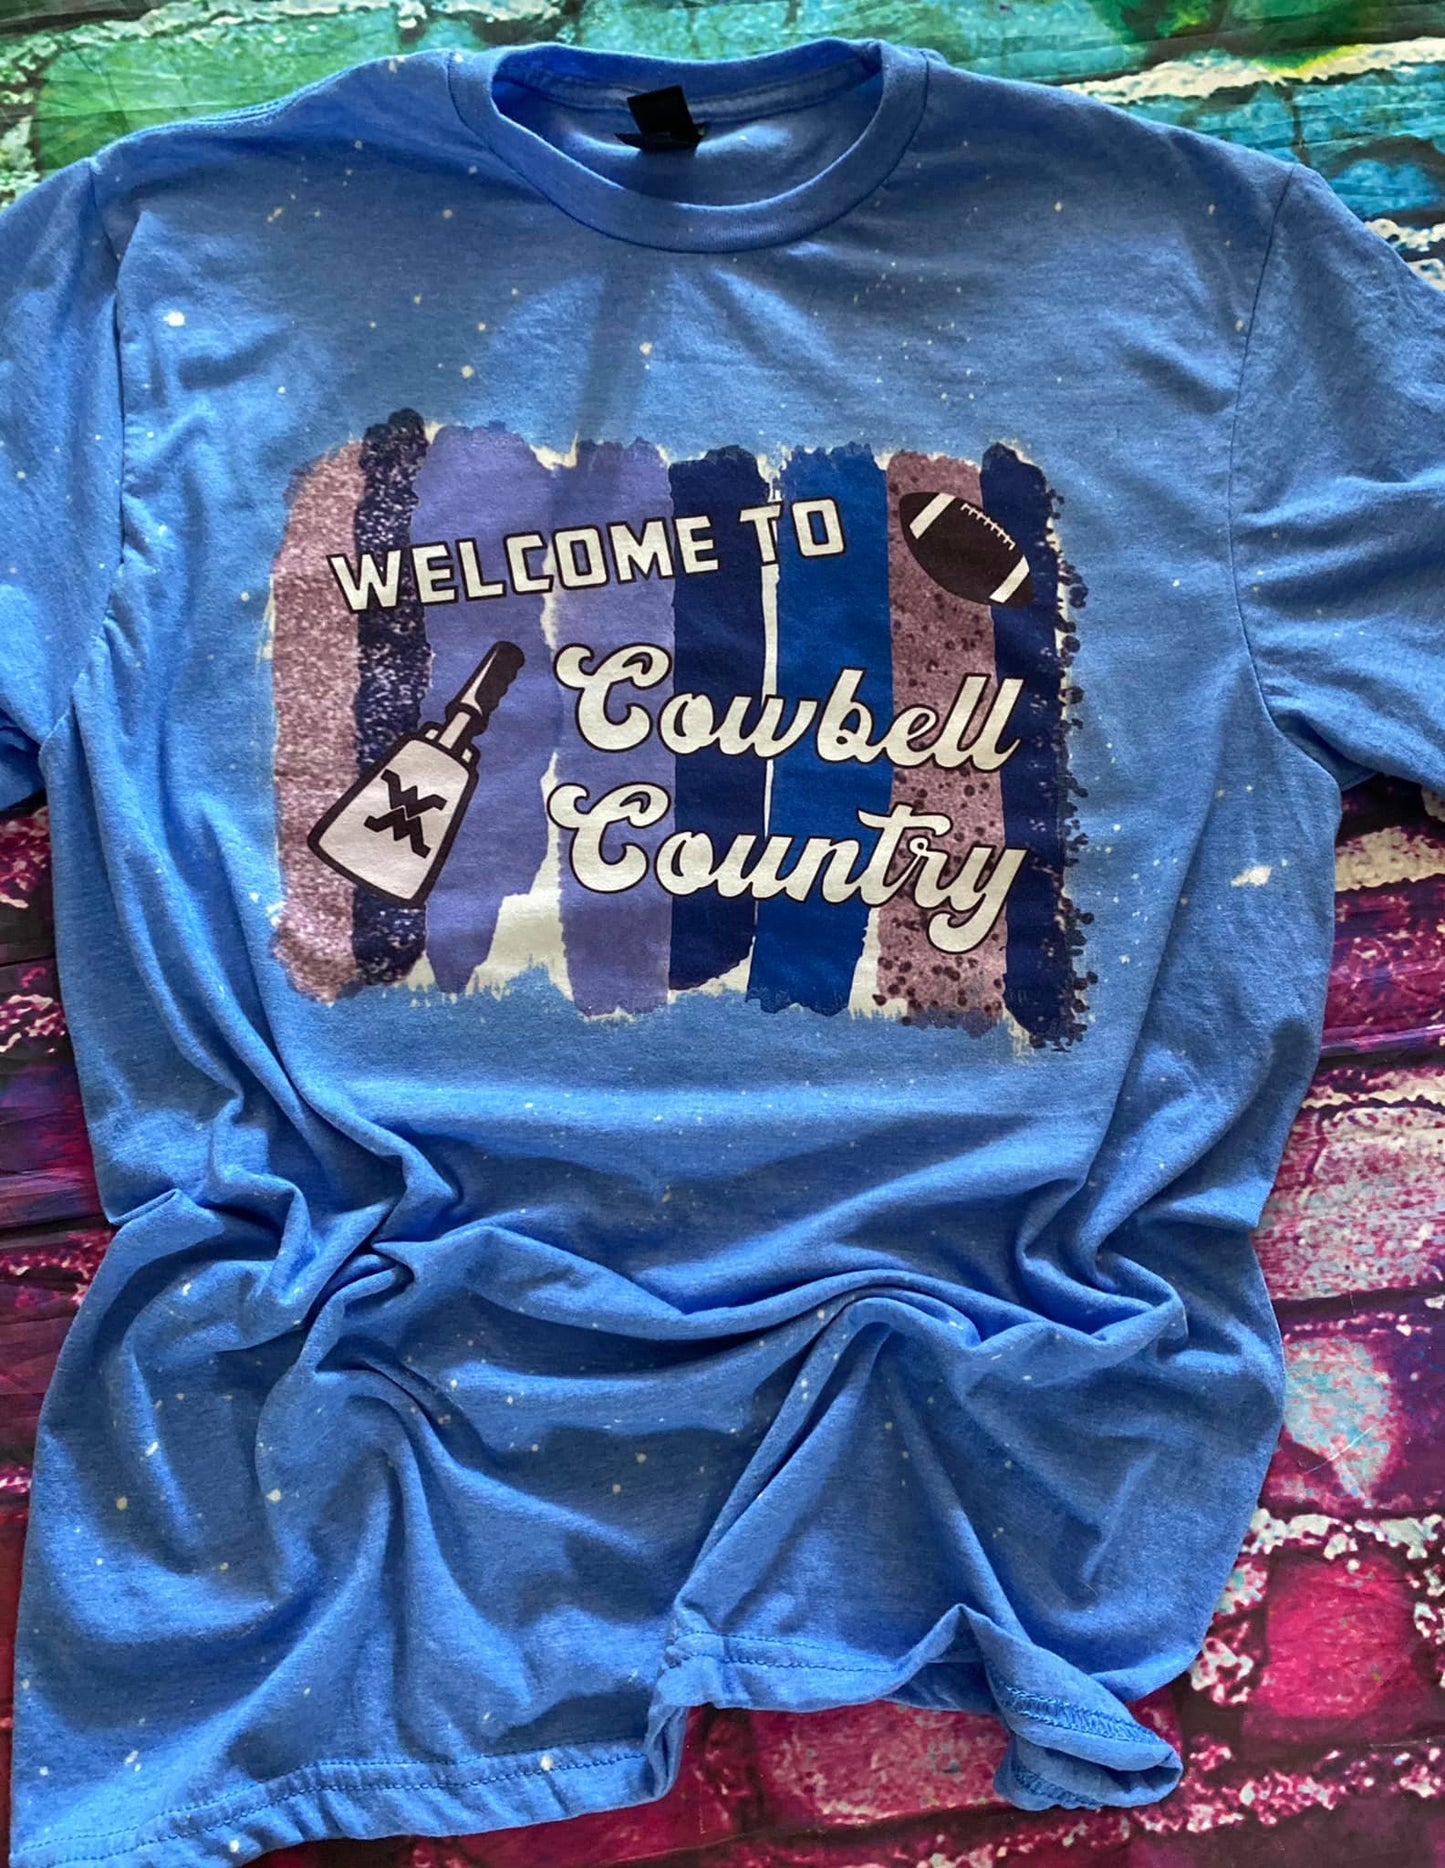 Cowbell country tee